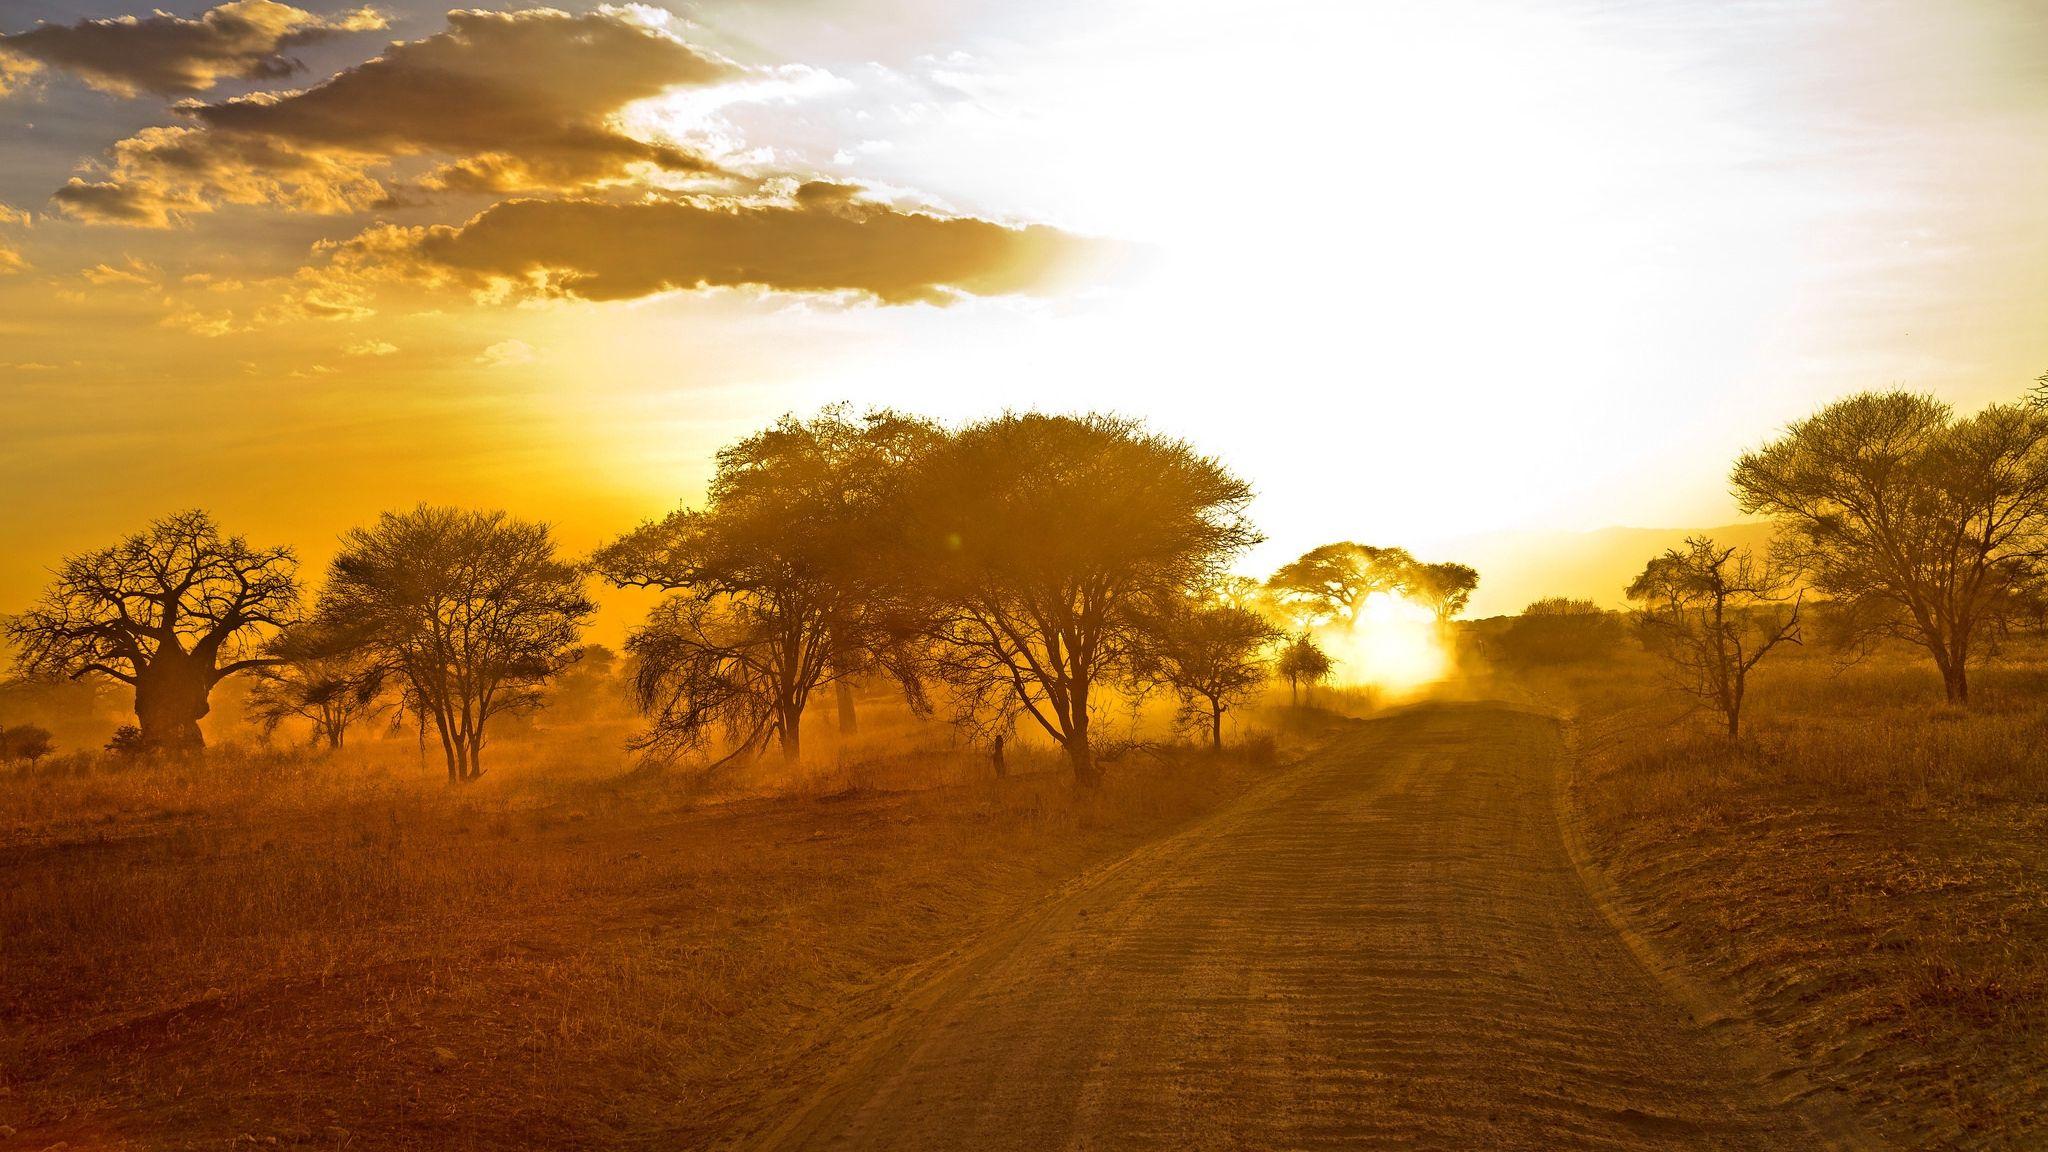 Download wallpaper 2048x1152 africa, road, sunrise, sand, trees